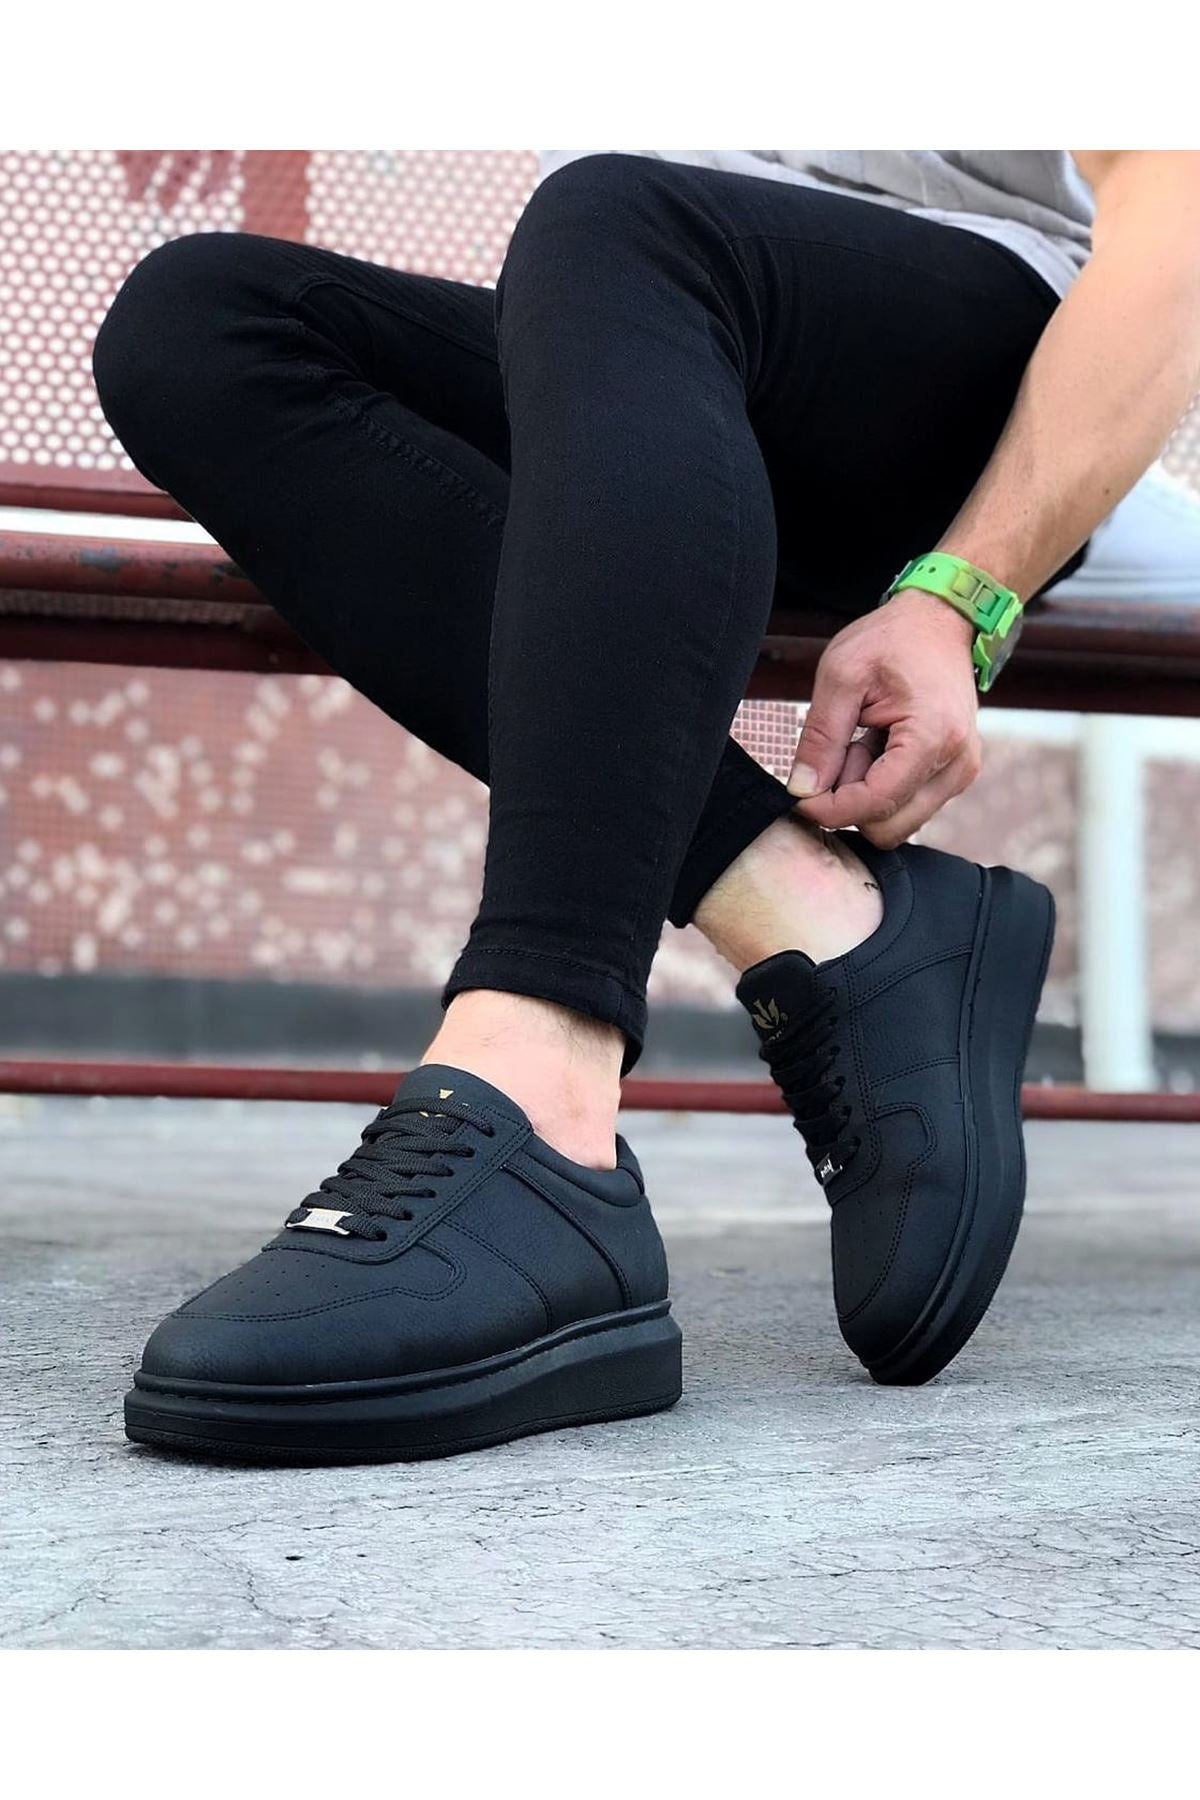 WG011 Charcoal Men's Casual Shoes - STREETMODE™